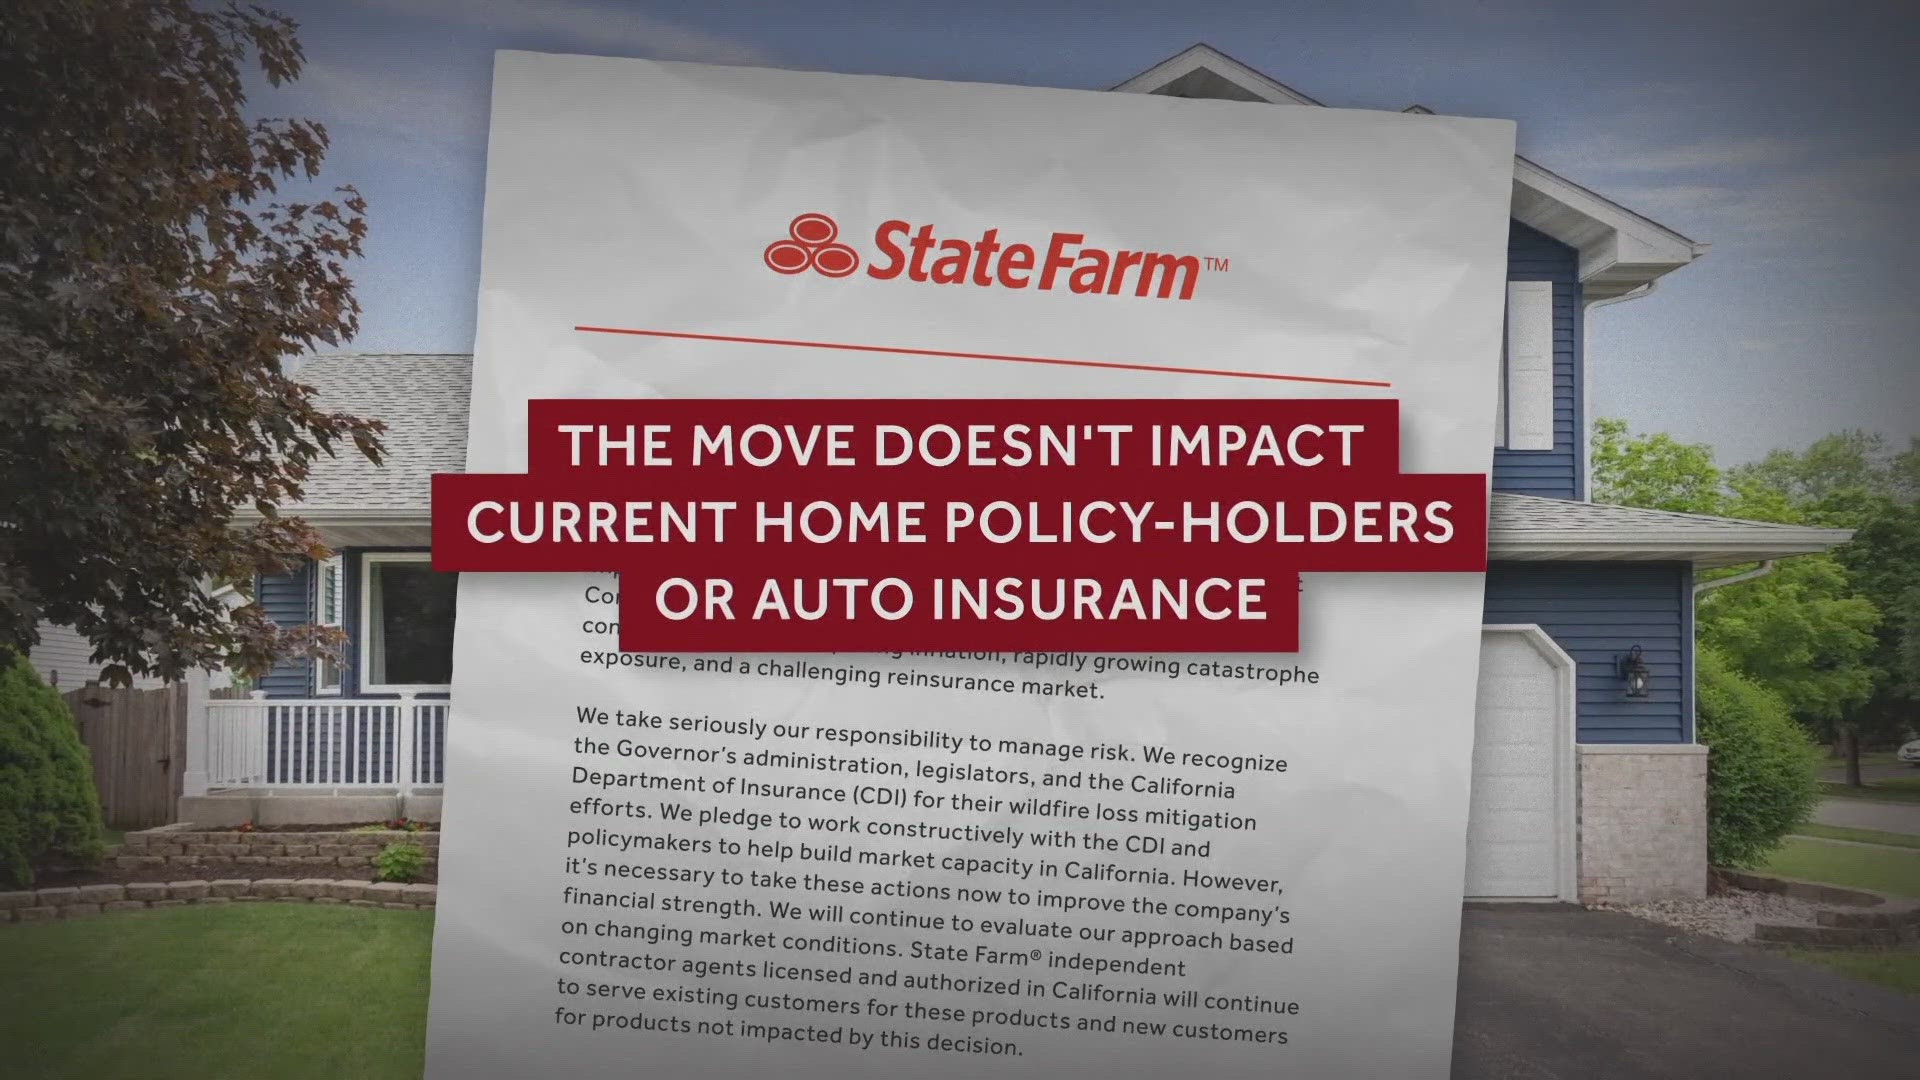 The biggest U.S. home insurance, State Farm, has stopped accepting new applications for people living in California.